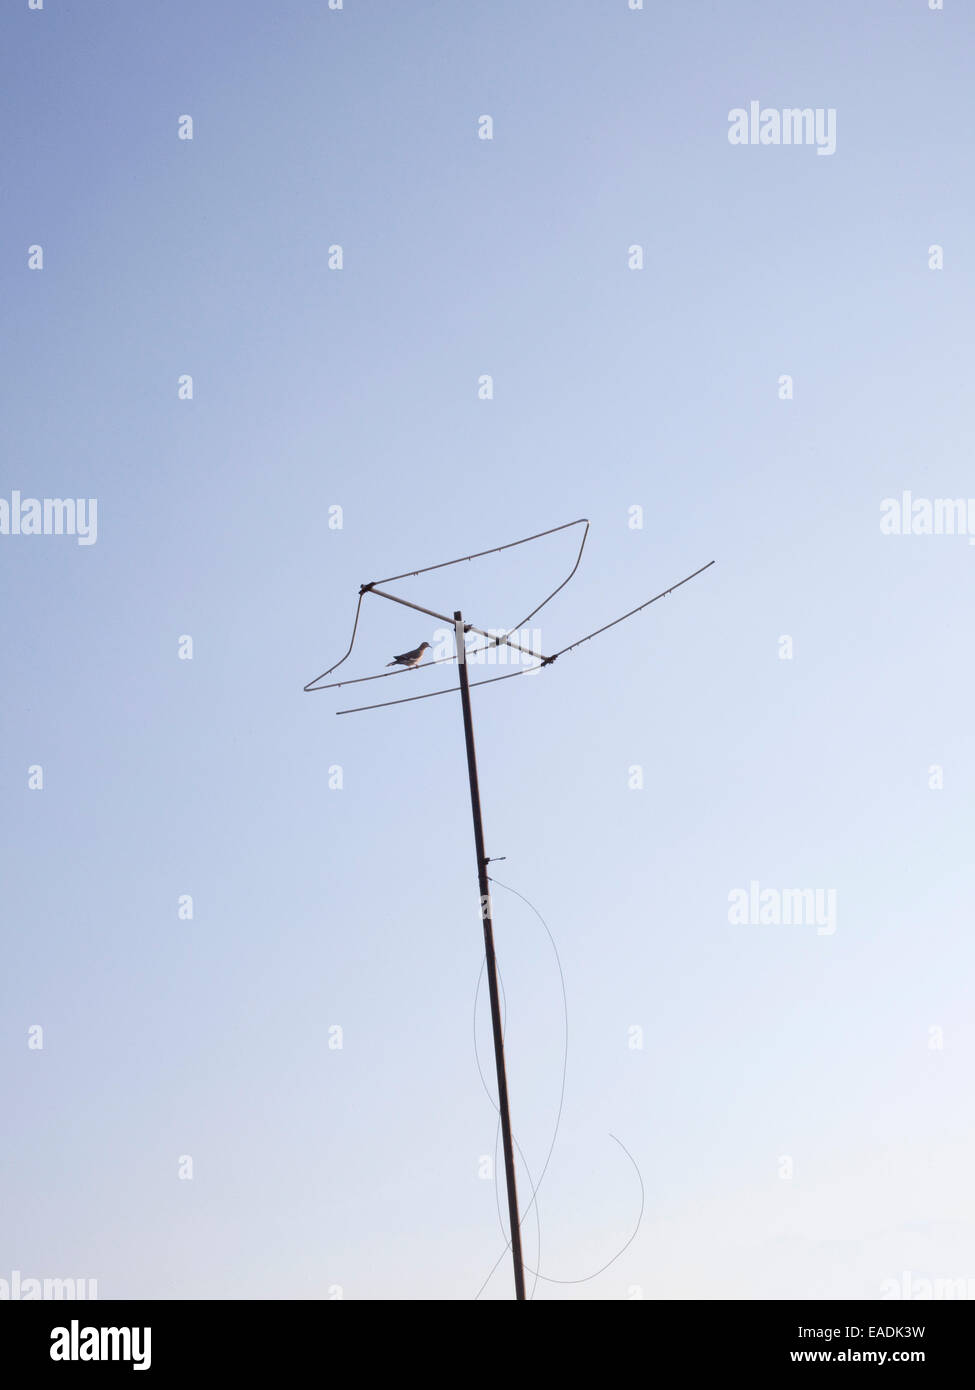 Mourning Dove on television Antenna Stock Photo